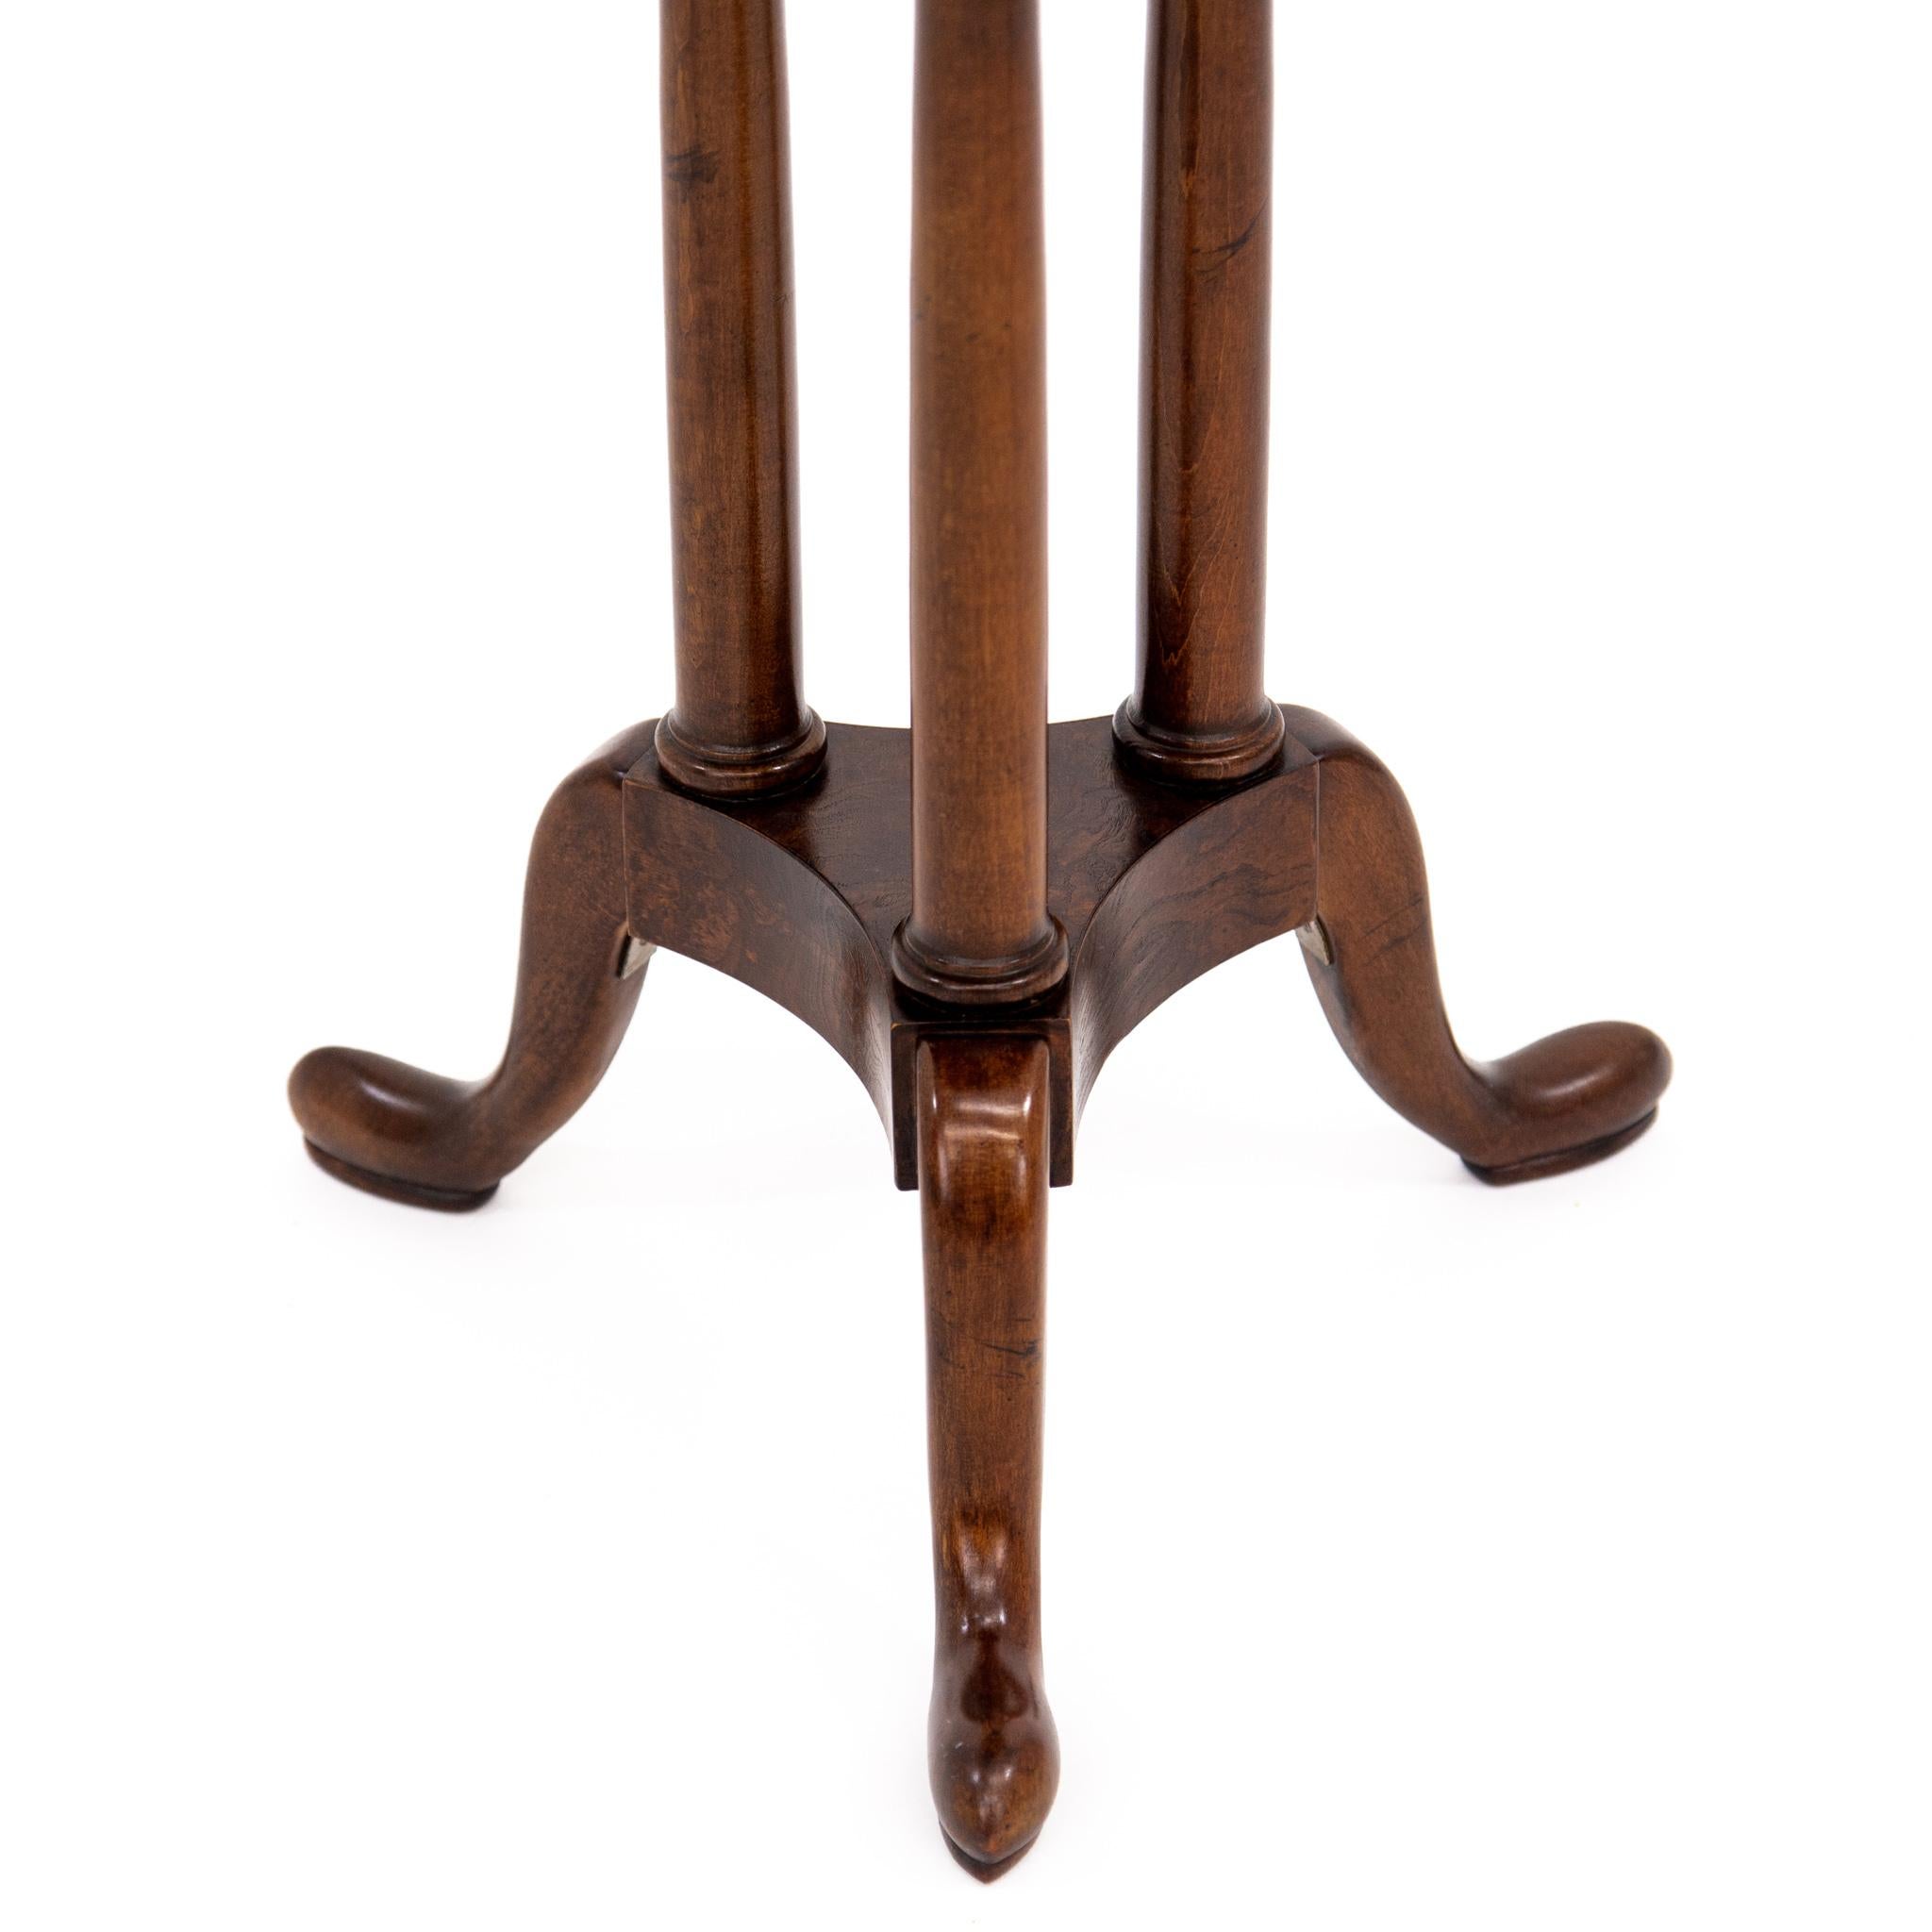 20th Century Queen Anne Style Burled Walnut Trefoil Side Table by Baker Furniture